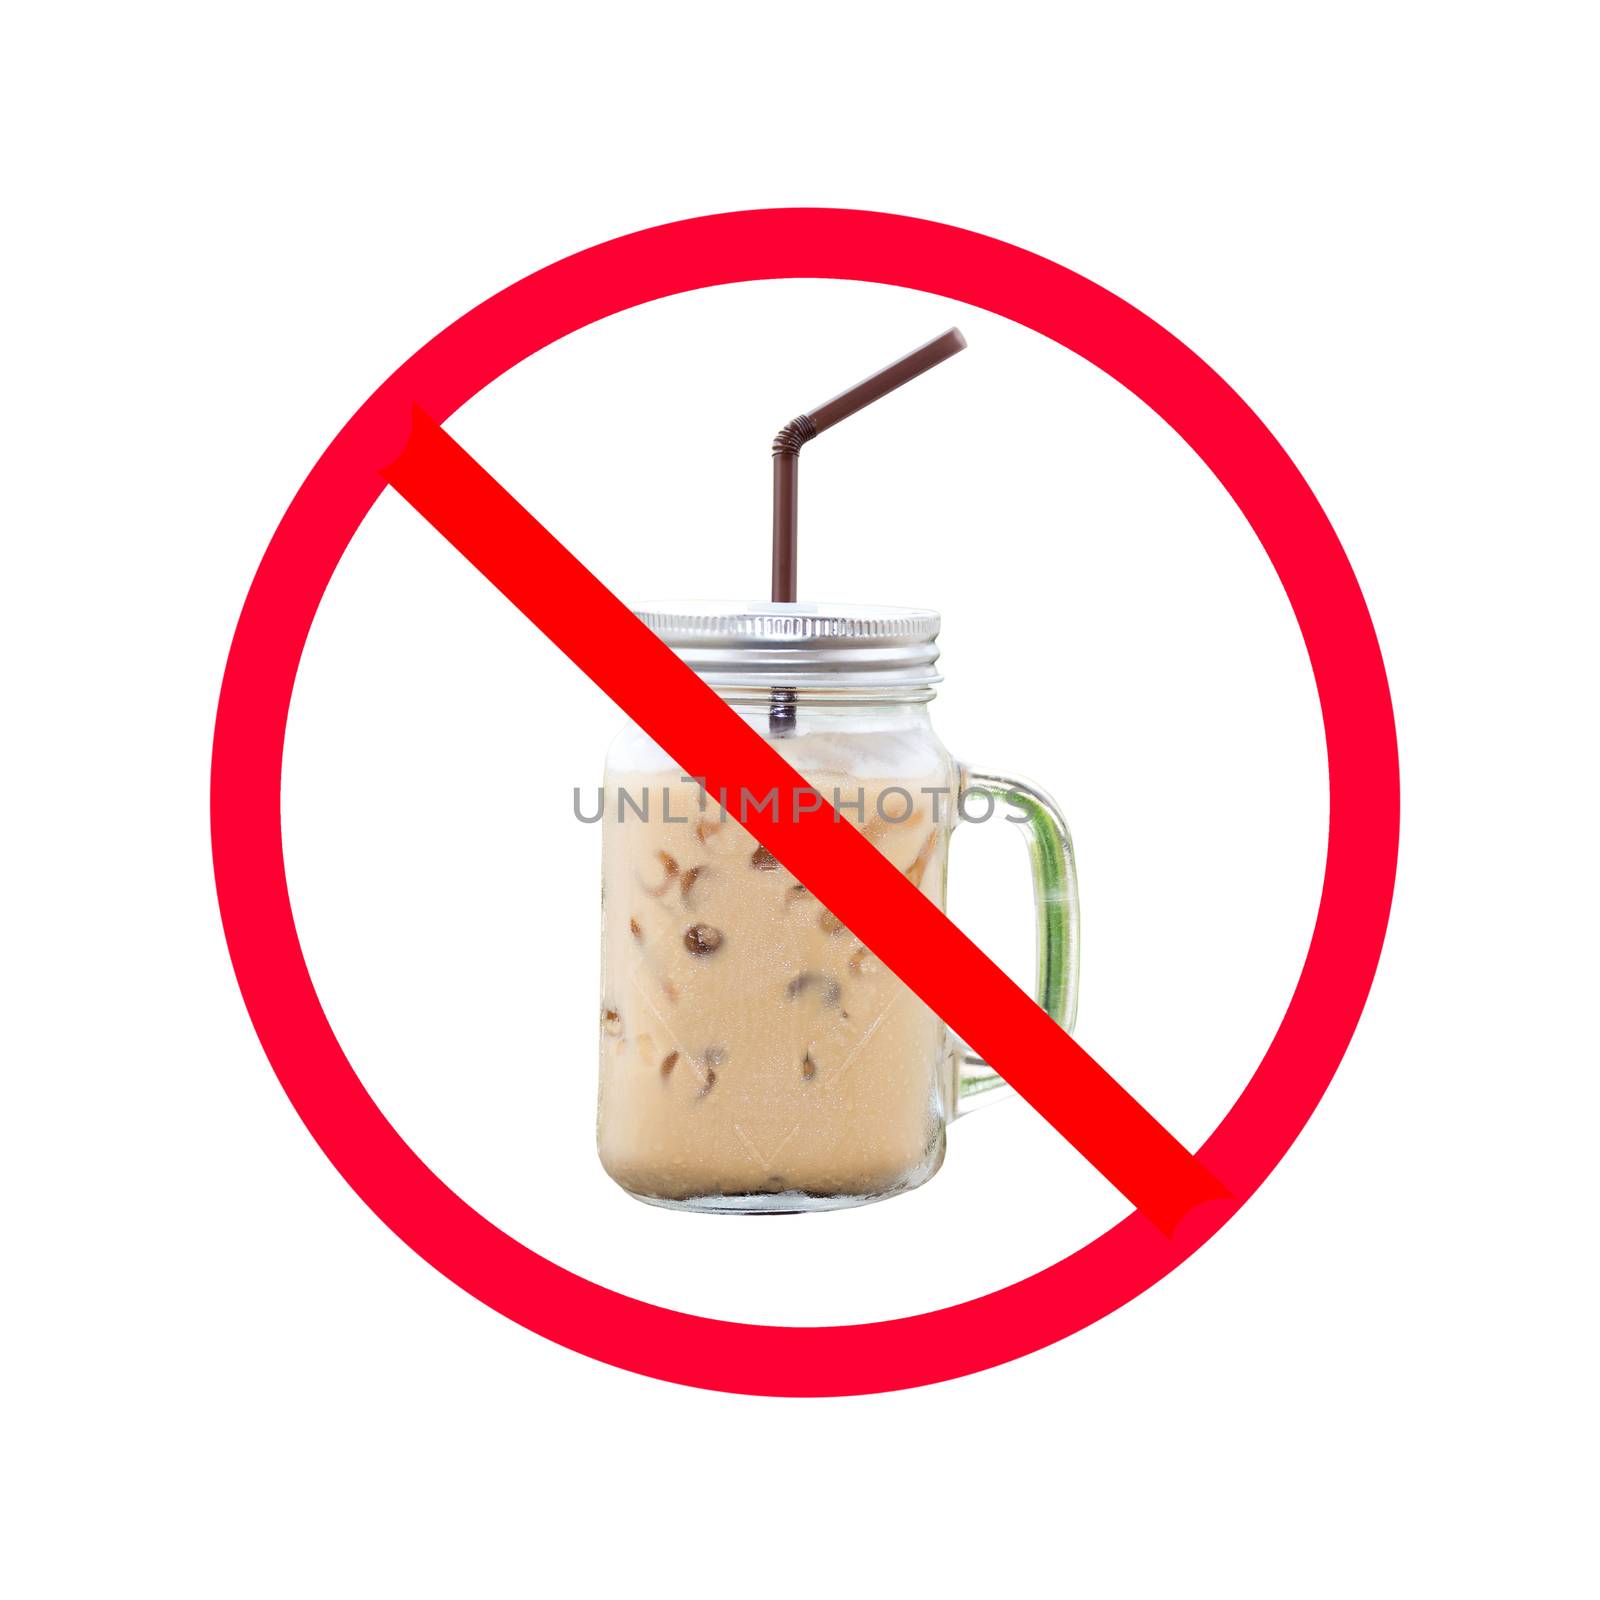 The red circle with slash on ice coffee isolated on white background ; Concept for food and sugar dieting to lose weight.